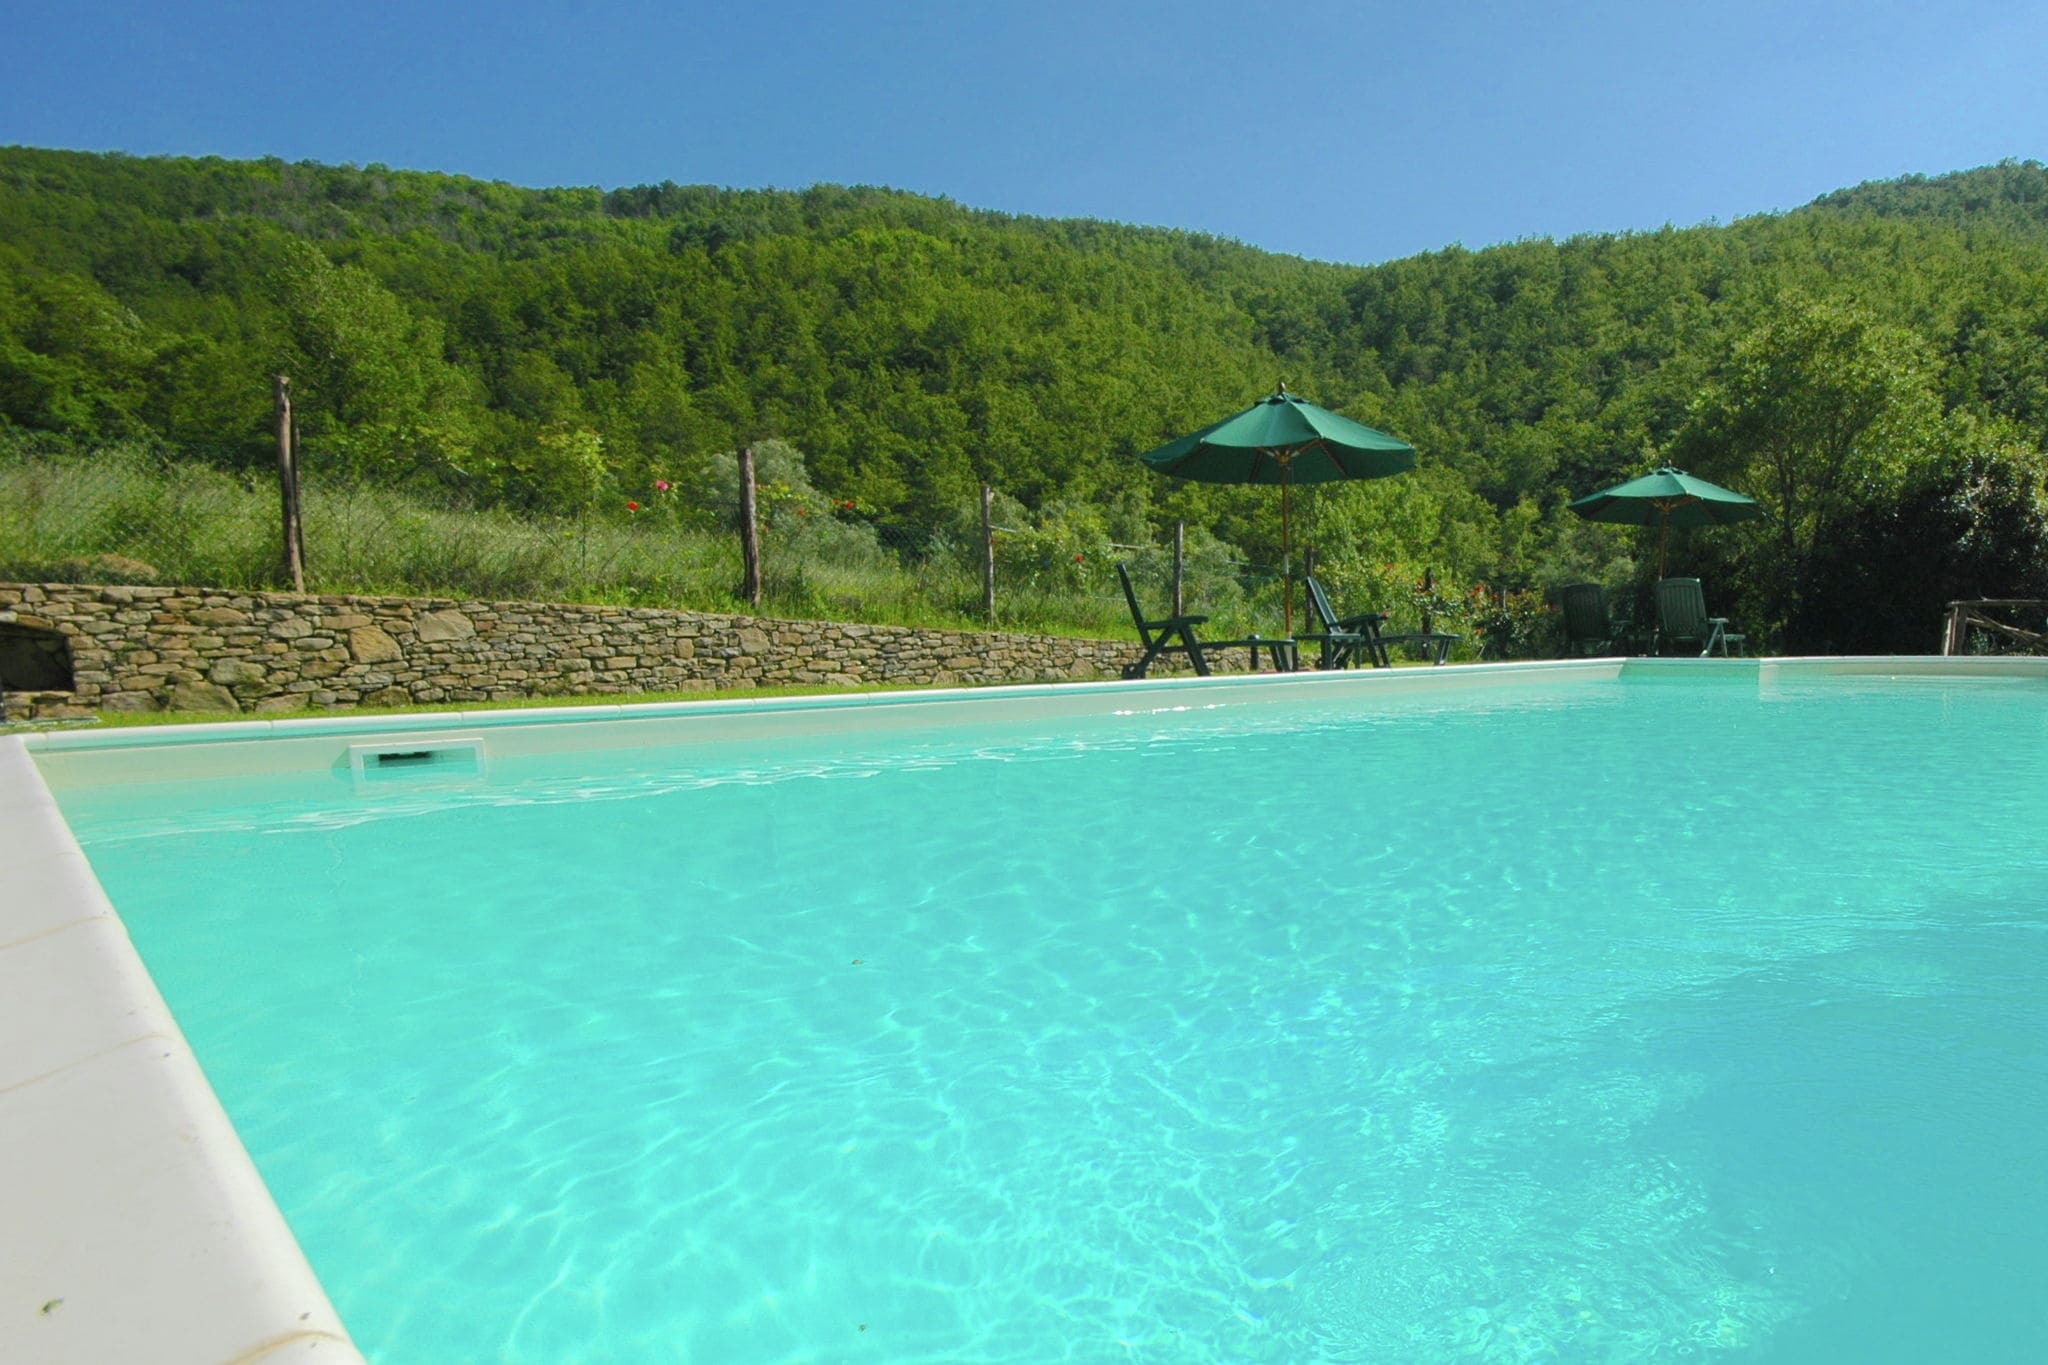 Luxury Cottage in Lisciano Niccone Umbria with Swimming Pool